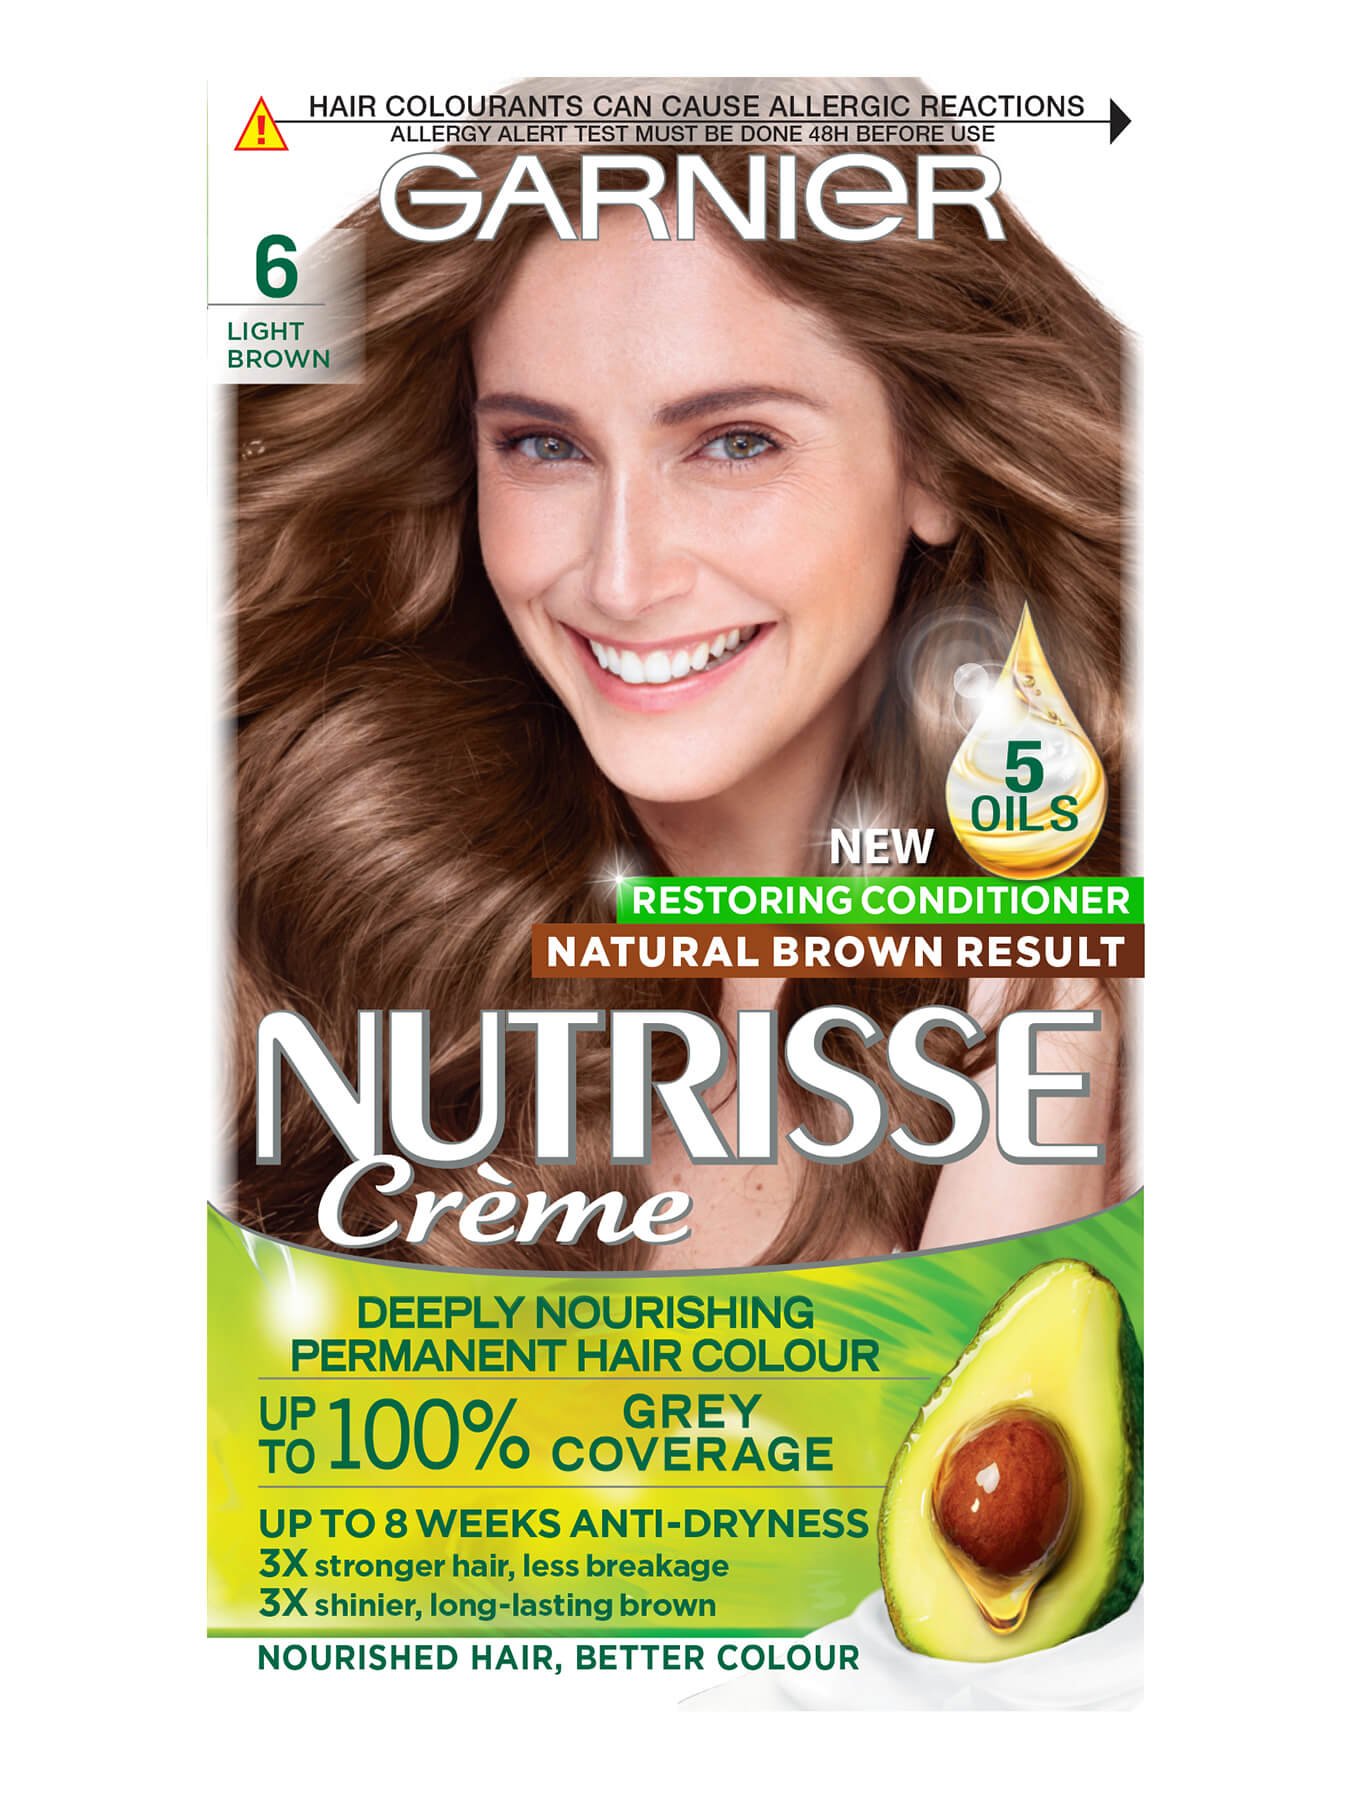 Light Natural Brown Hair Colour, PPD Free Hair Dye | Natures Greybusters